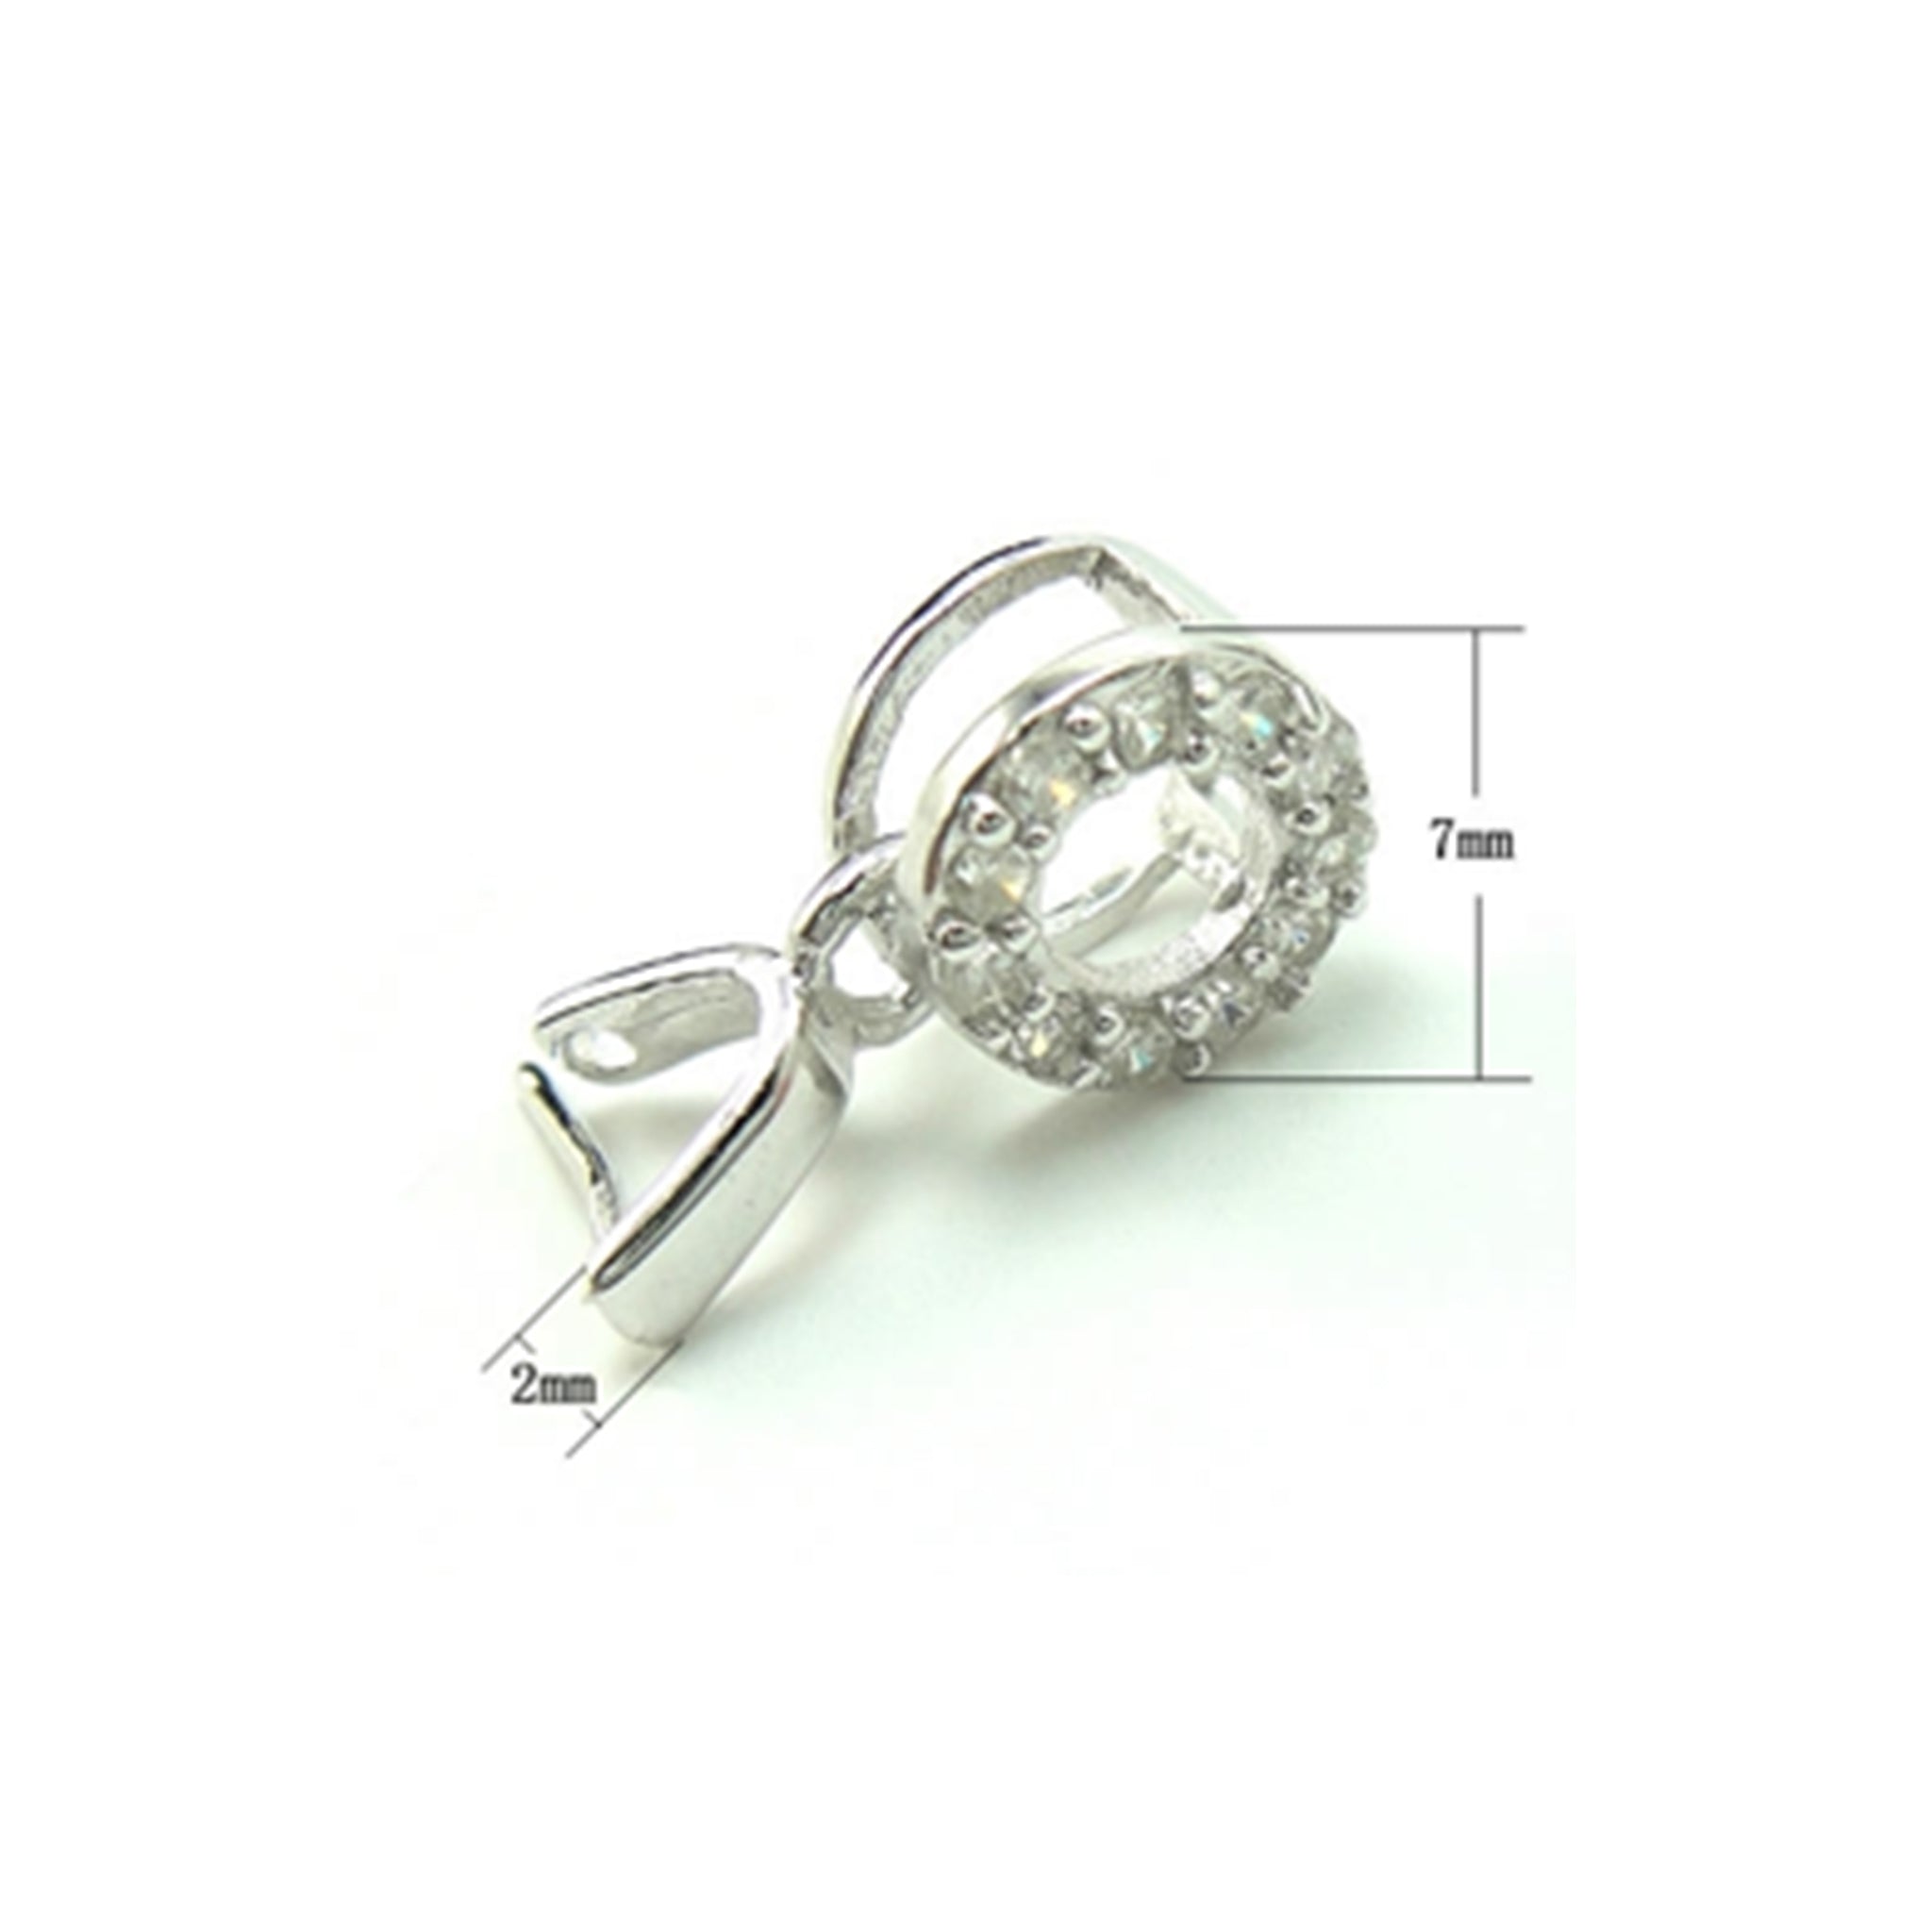 Ring Pinch Bail with Cubic Zirconia Inlays in Sterling Silver 14.4x6x2mm